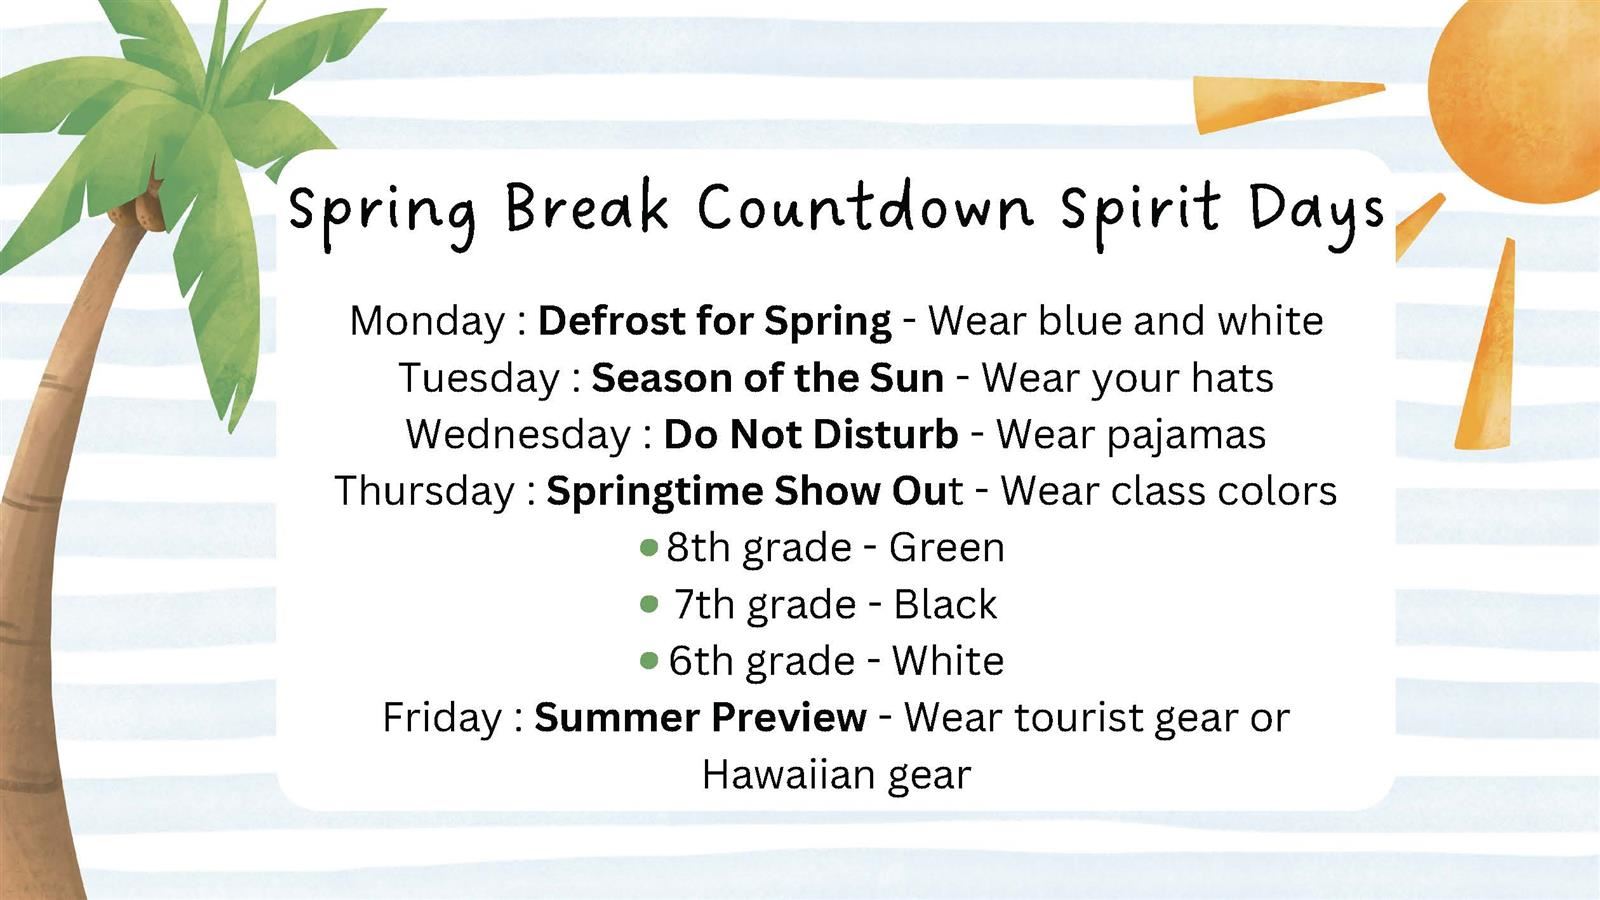 Monday : Wear blue and white. Tuesday : Wear your hats. Wednesday: Wear PJ's. Thursday: Class Colors. Friday: Hawaiian Gear